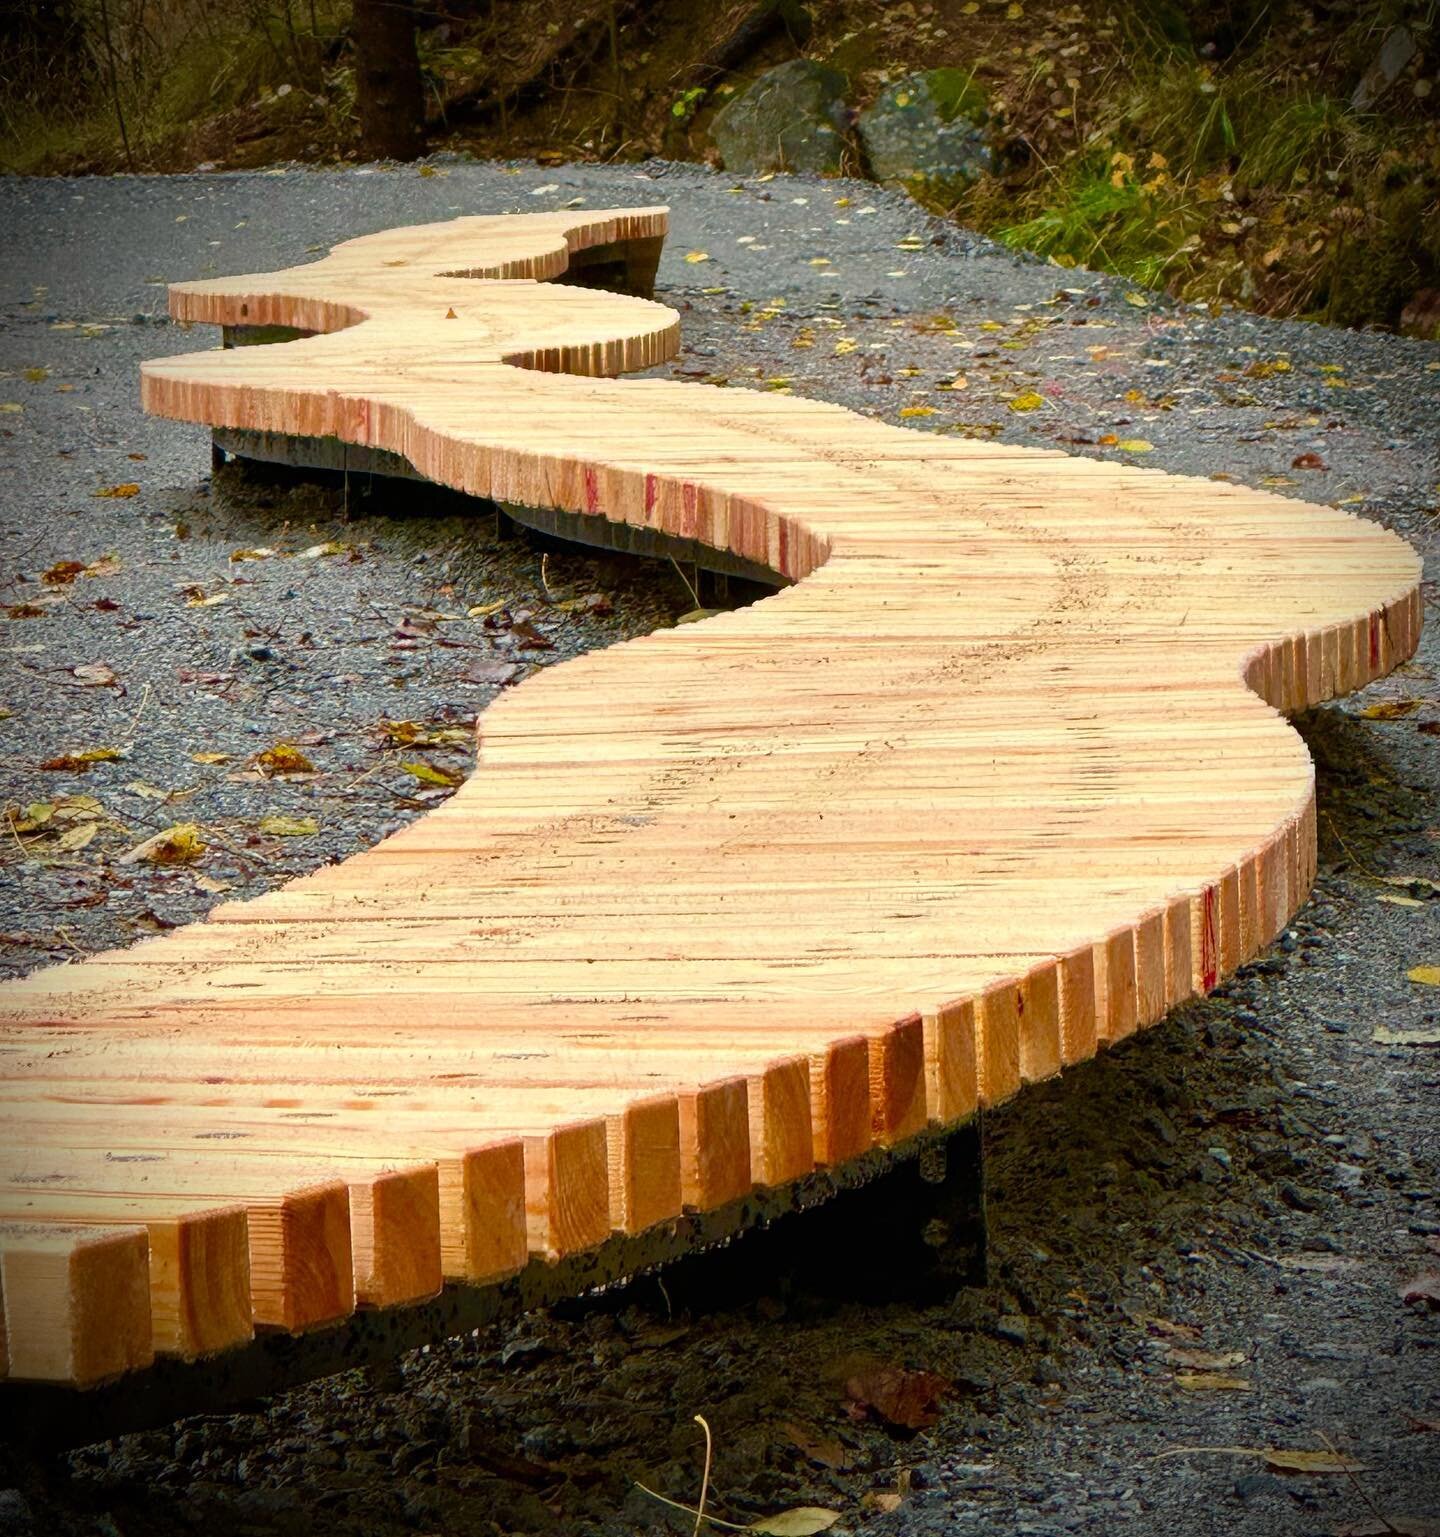 The 40 cm Duckboard size works perfect for balance related features while the 80 cm Boardwalk is enough for toddlers without pedals. Choose between two different radius or straight sections - and of course our rollers will fit within the same system 